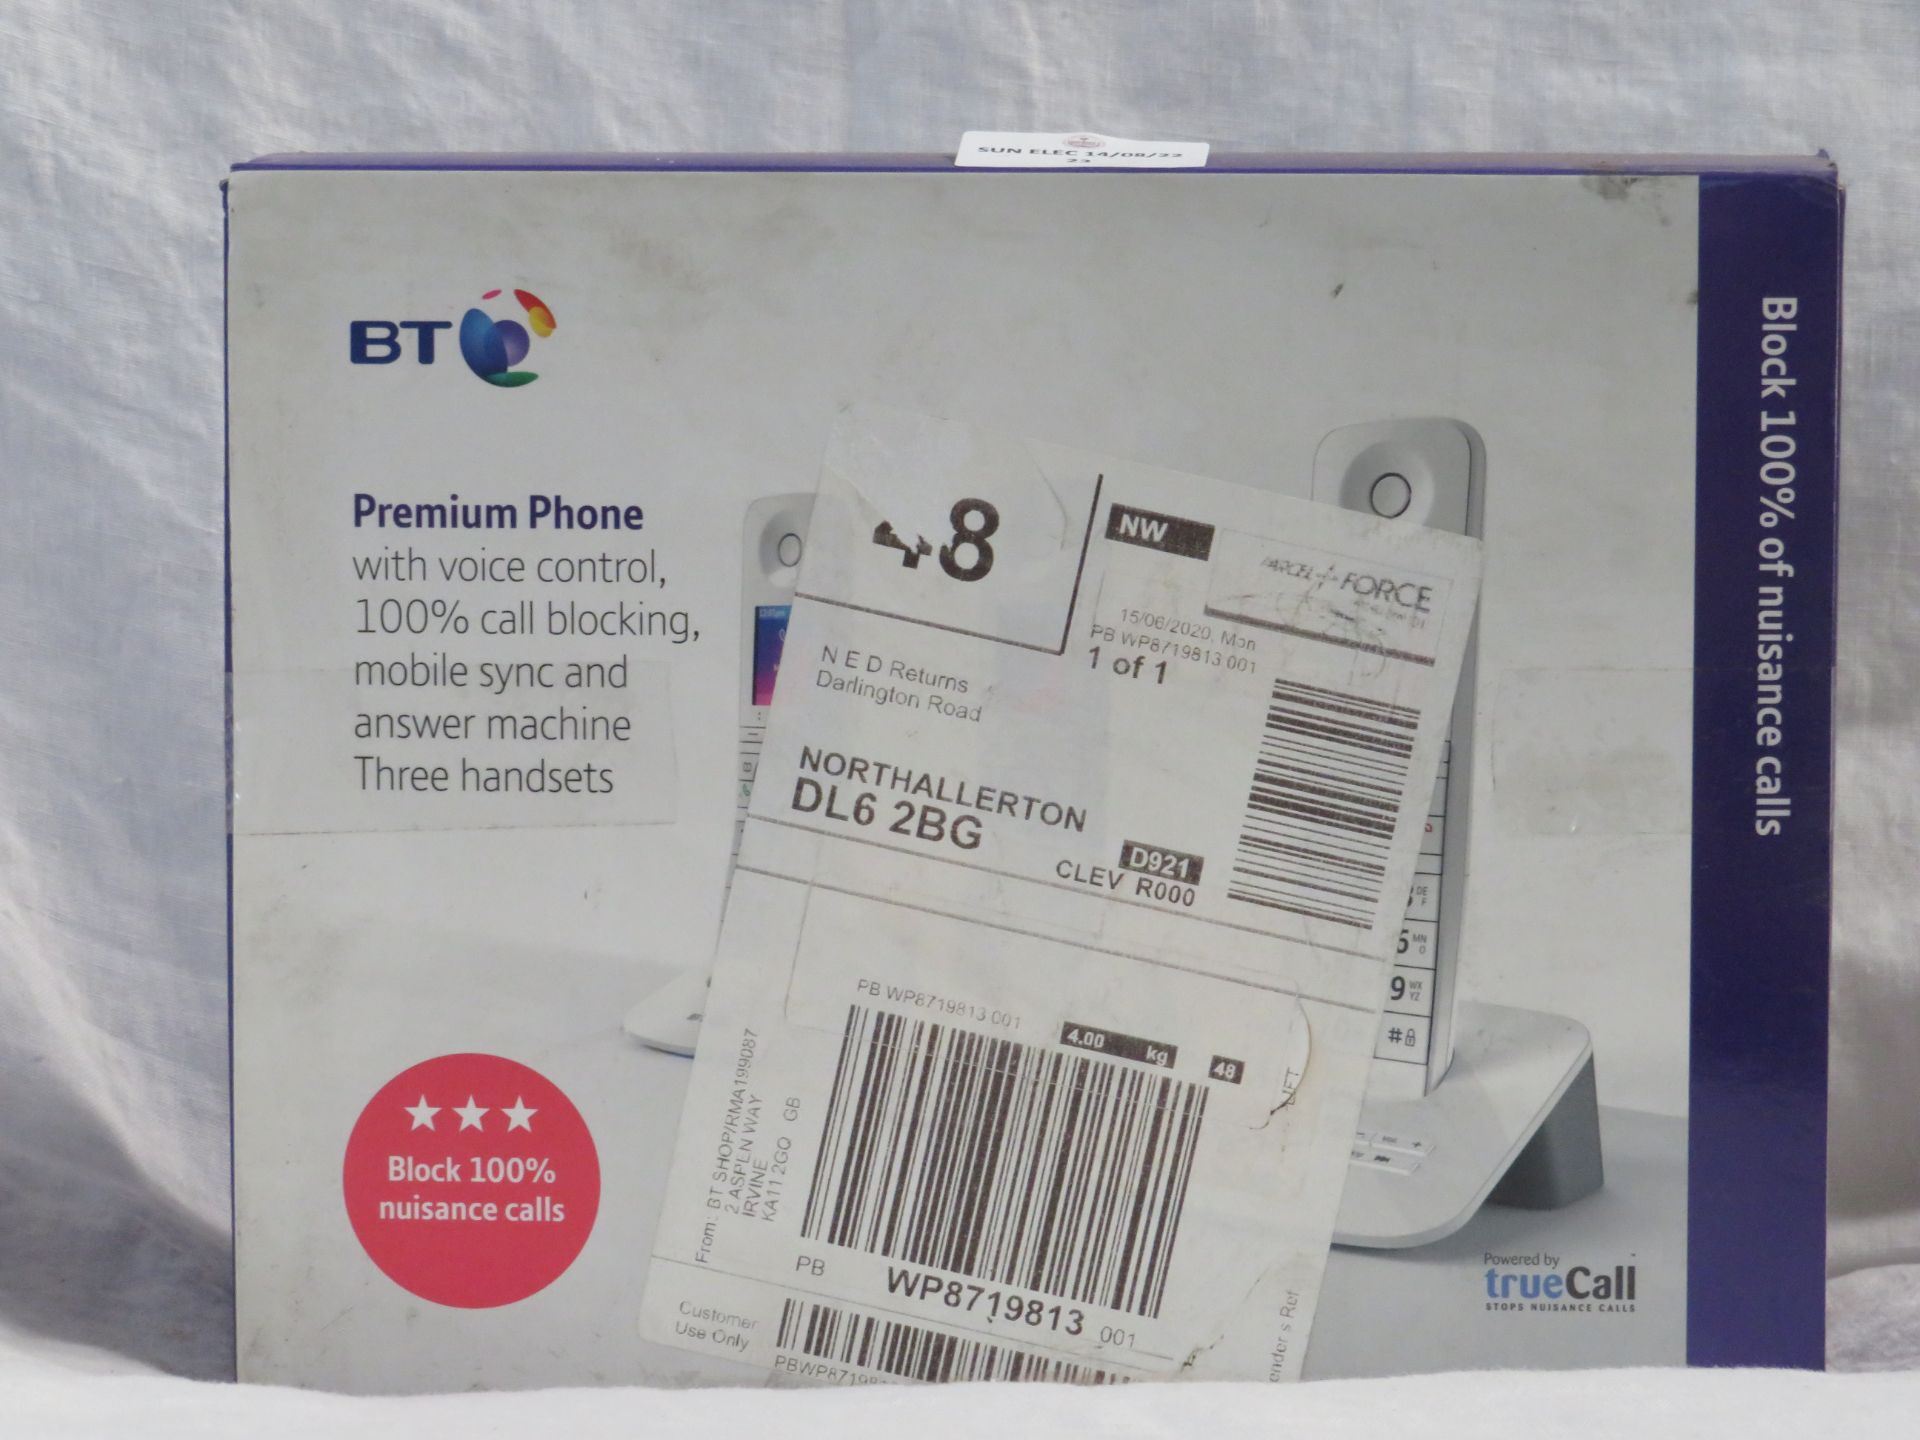 BT Premium Phone with voice control and 100% call blocking, mobile sync and answering machine, three